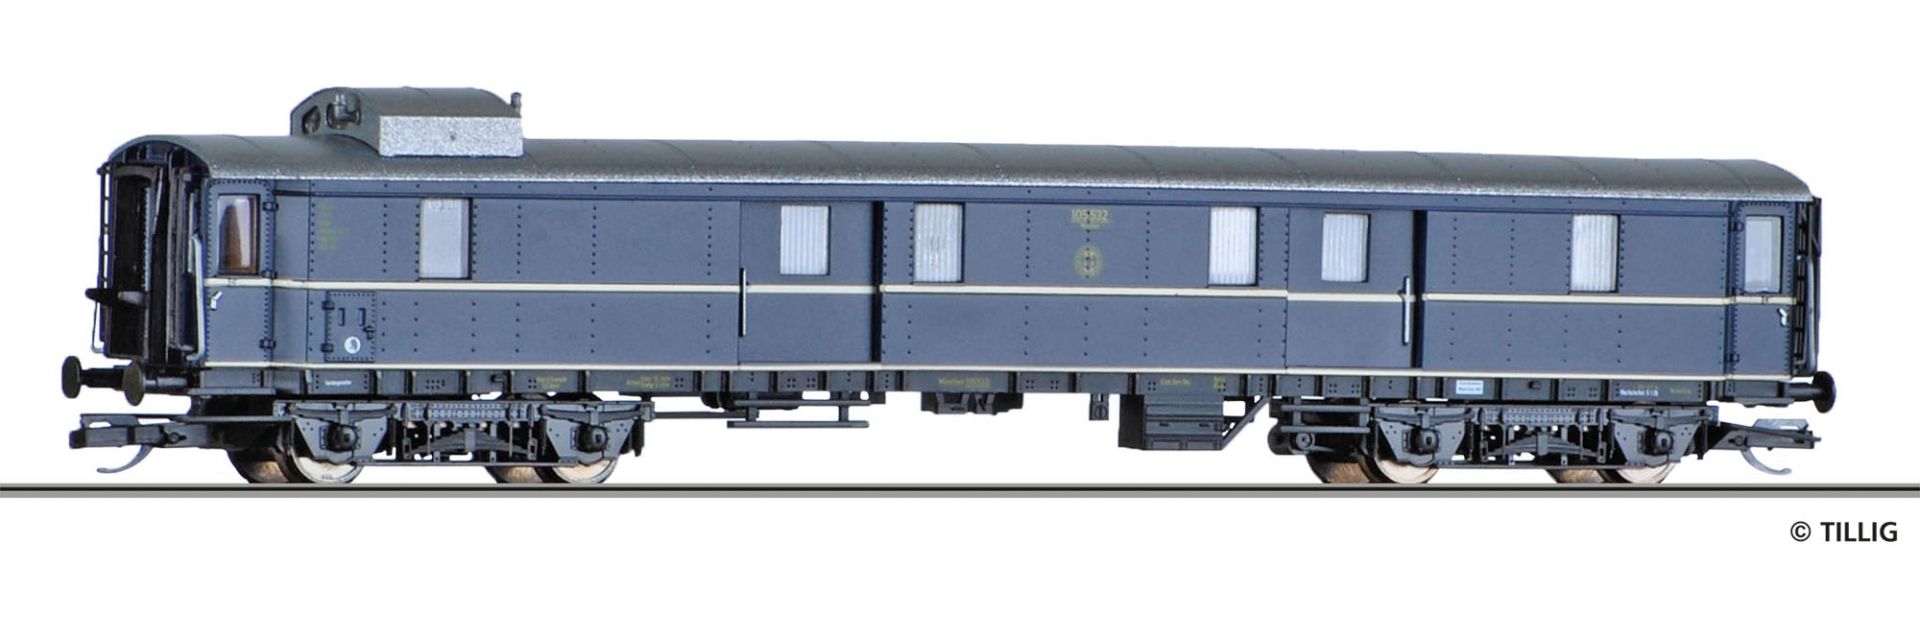 13391 | Baggage car DRG -sold out-